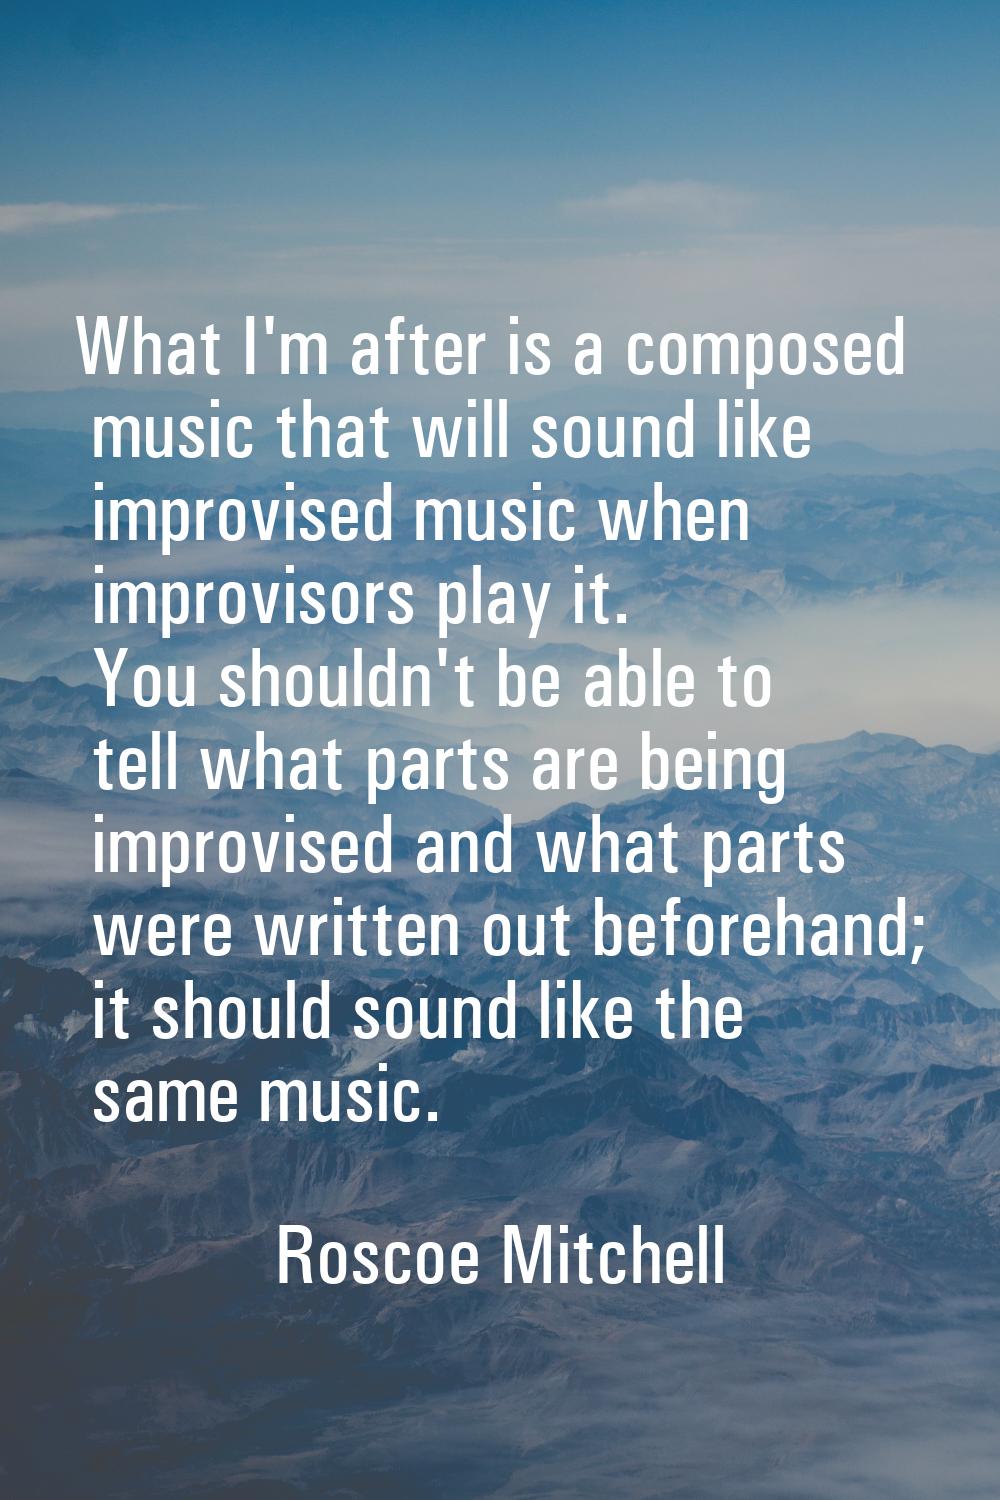 What I'm after is a composed music that will sound like improvised music when improvisors play it. 